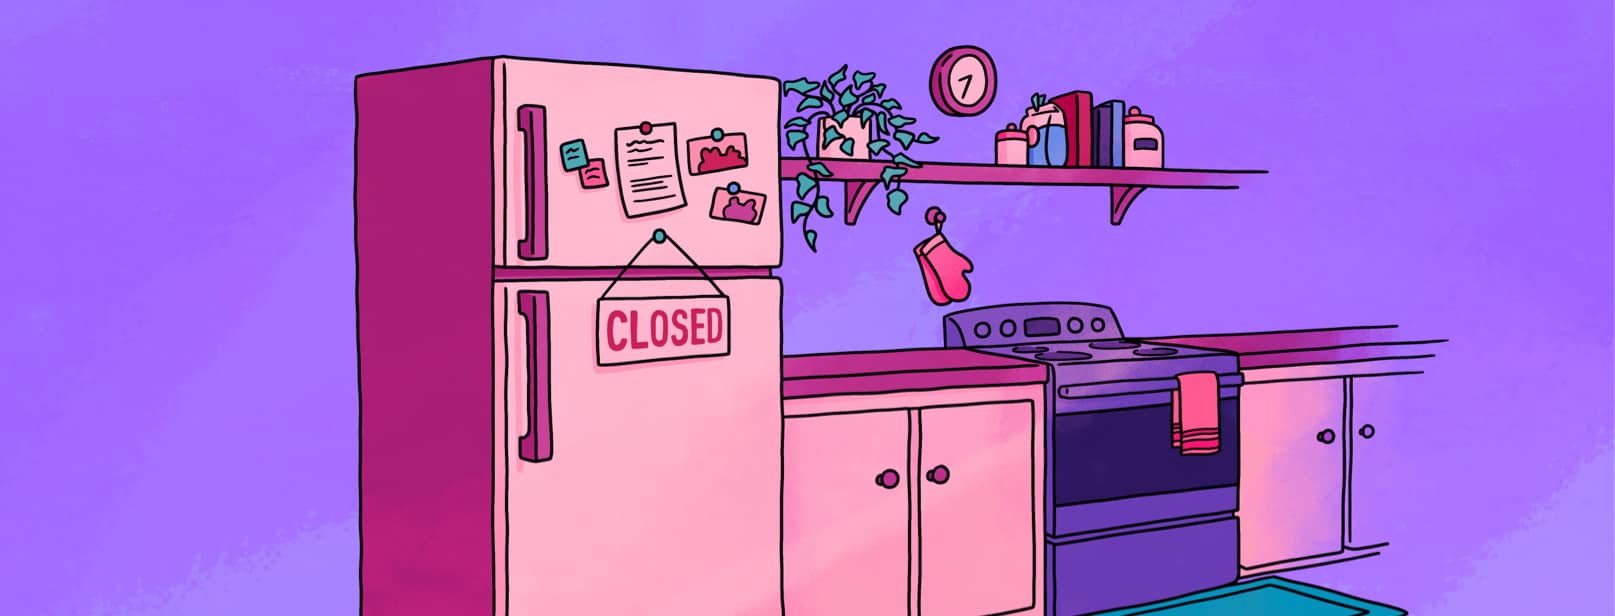 A kitchen at nighttime with a closed sign on the refrigerator.